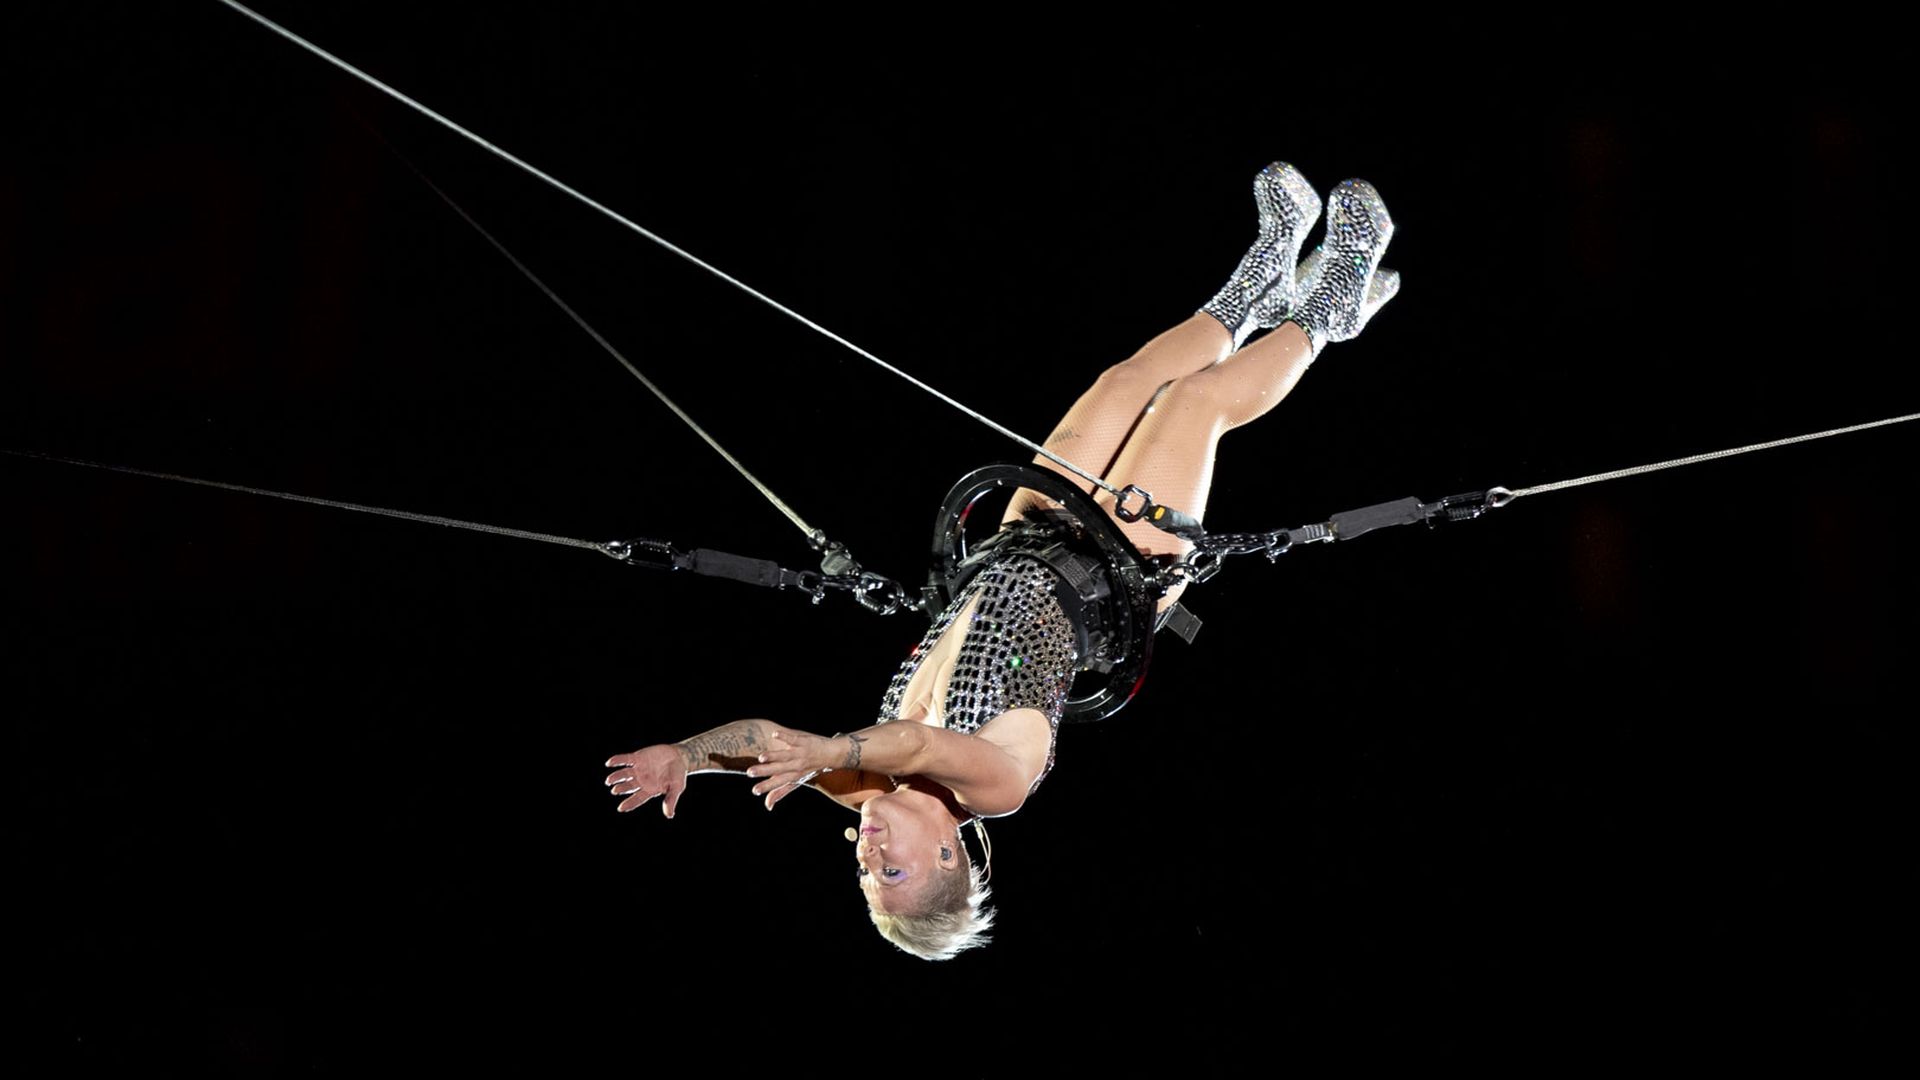 The singer Pink is suspended upside down from trapeze wires during a concert